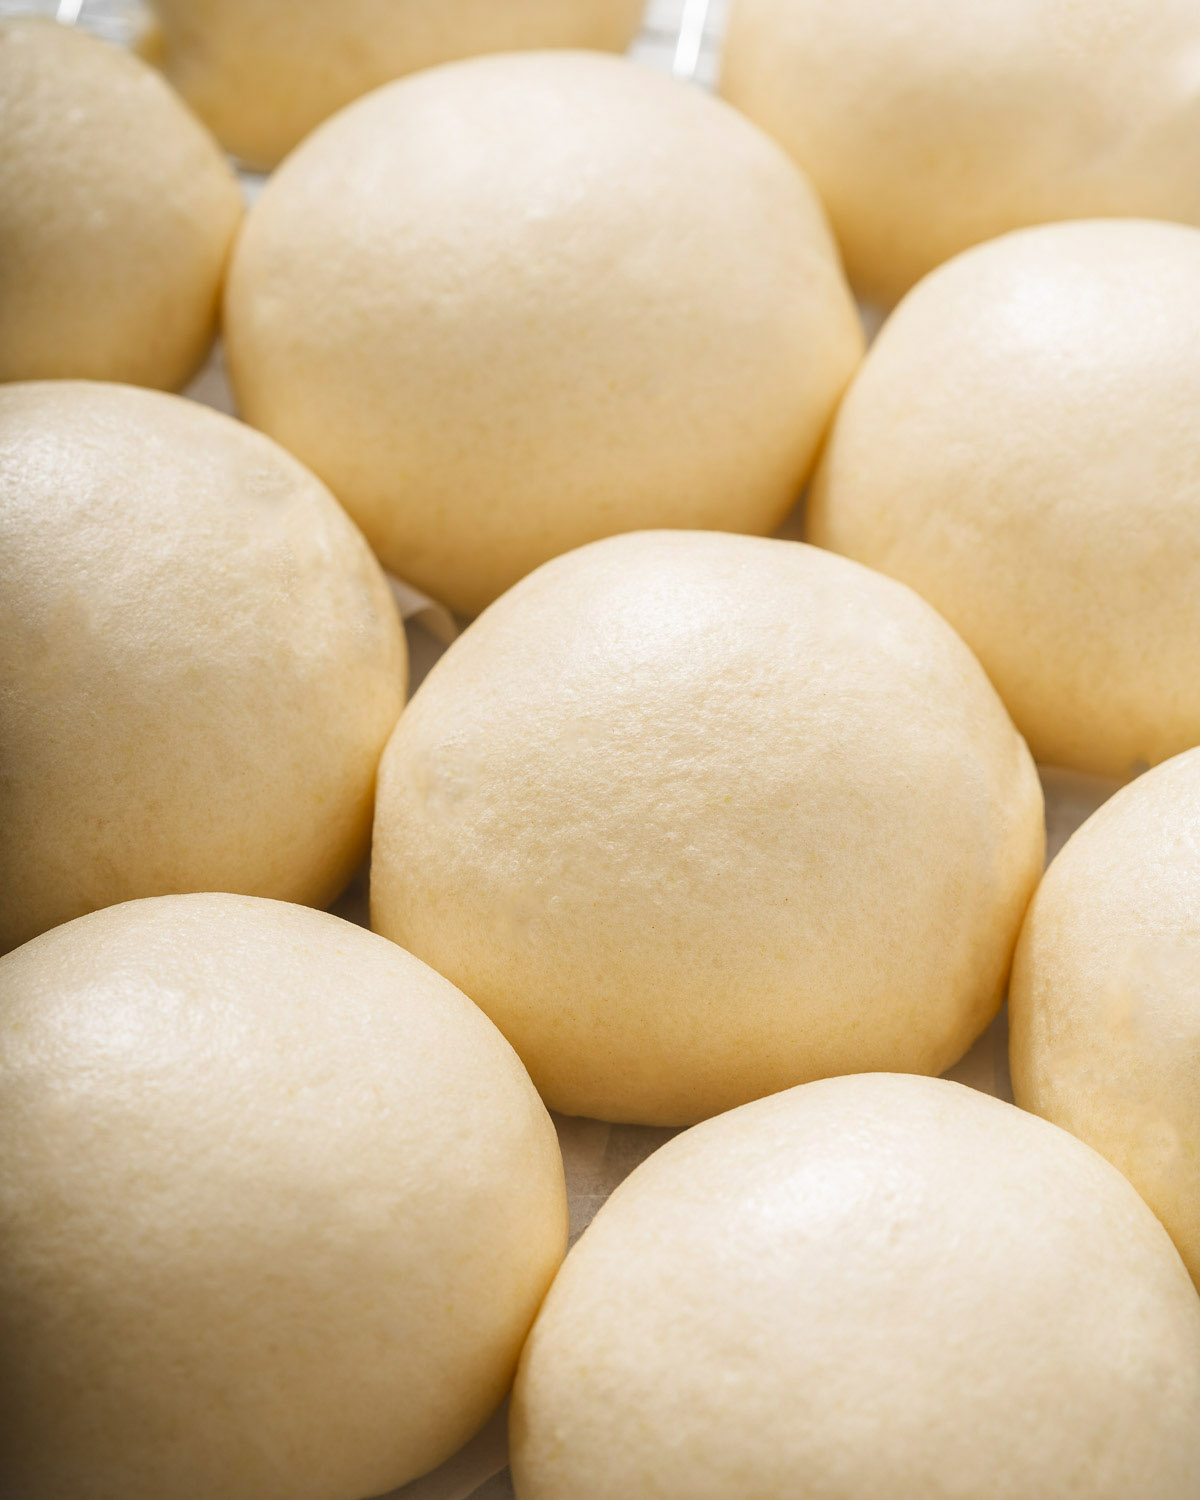 A grid of freshly steamed Chinese buns known as mantou.